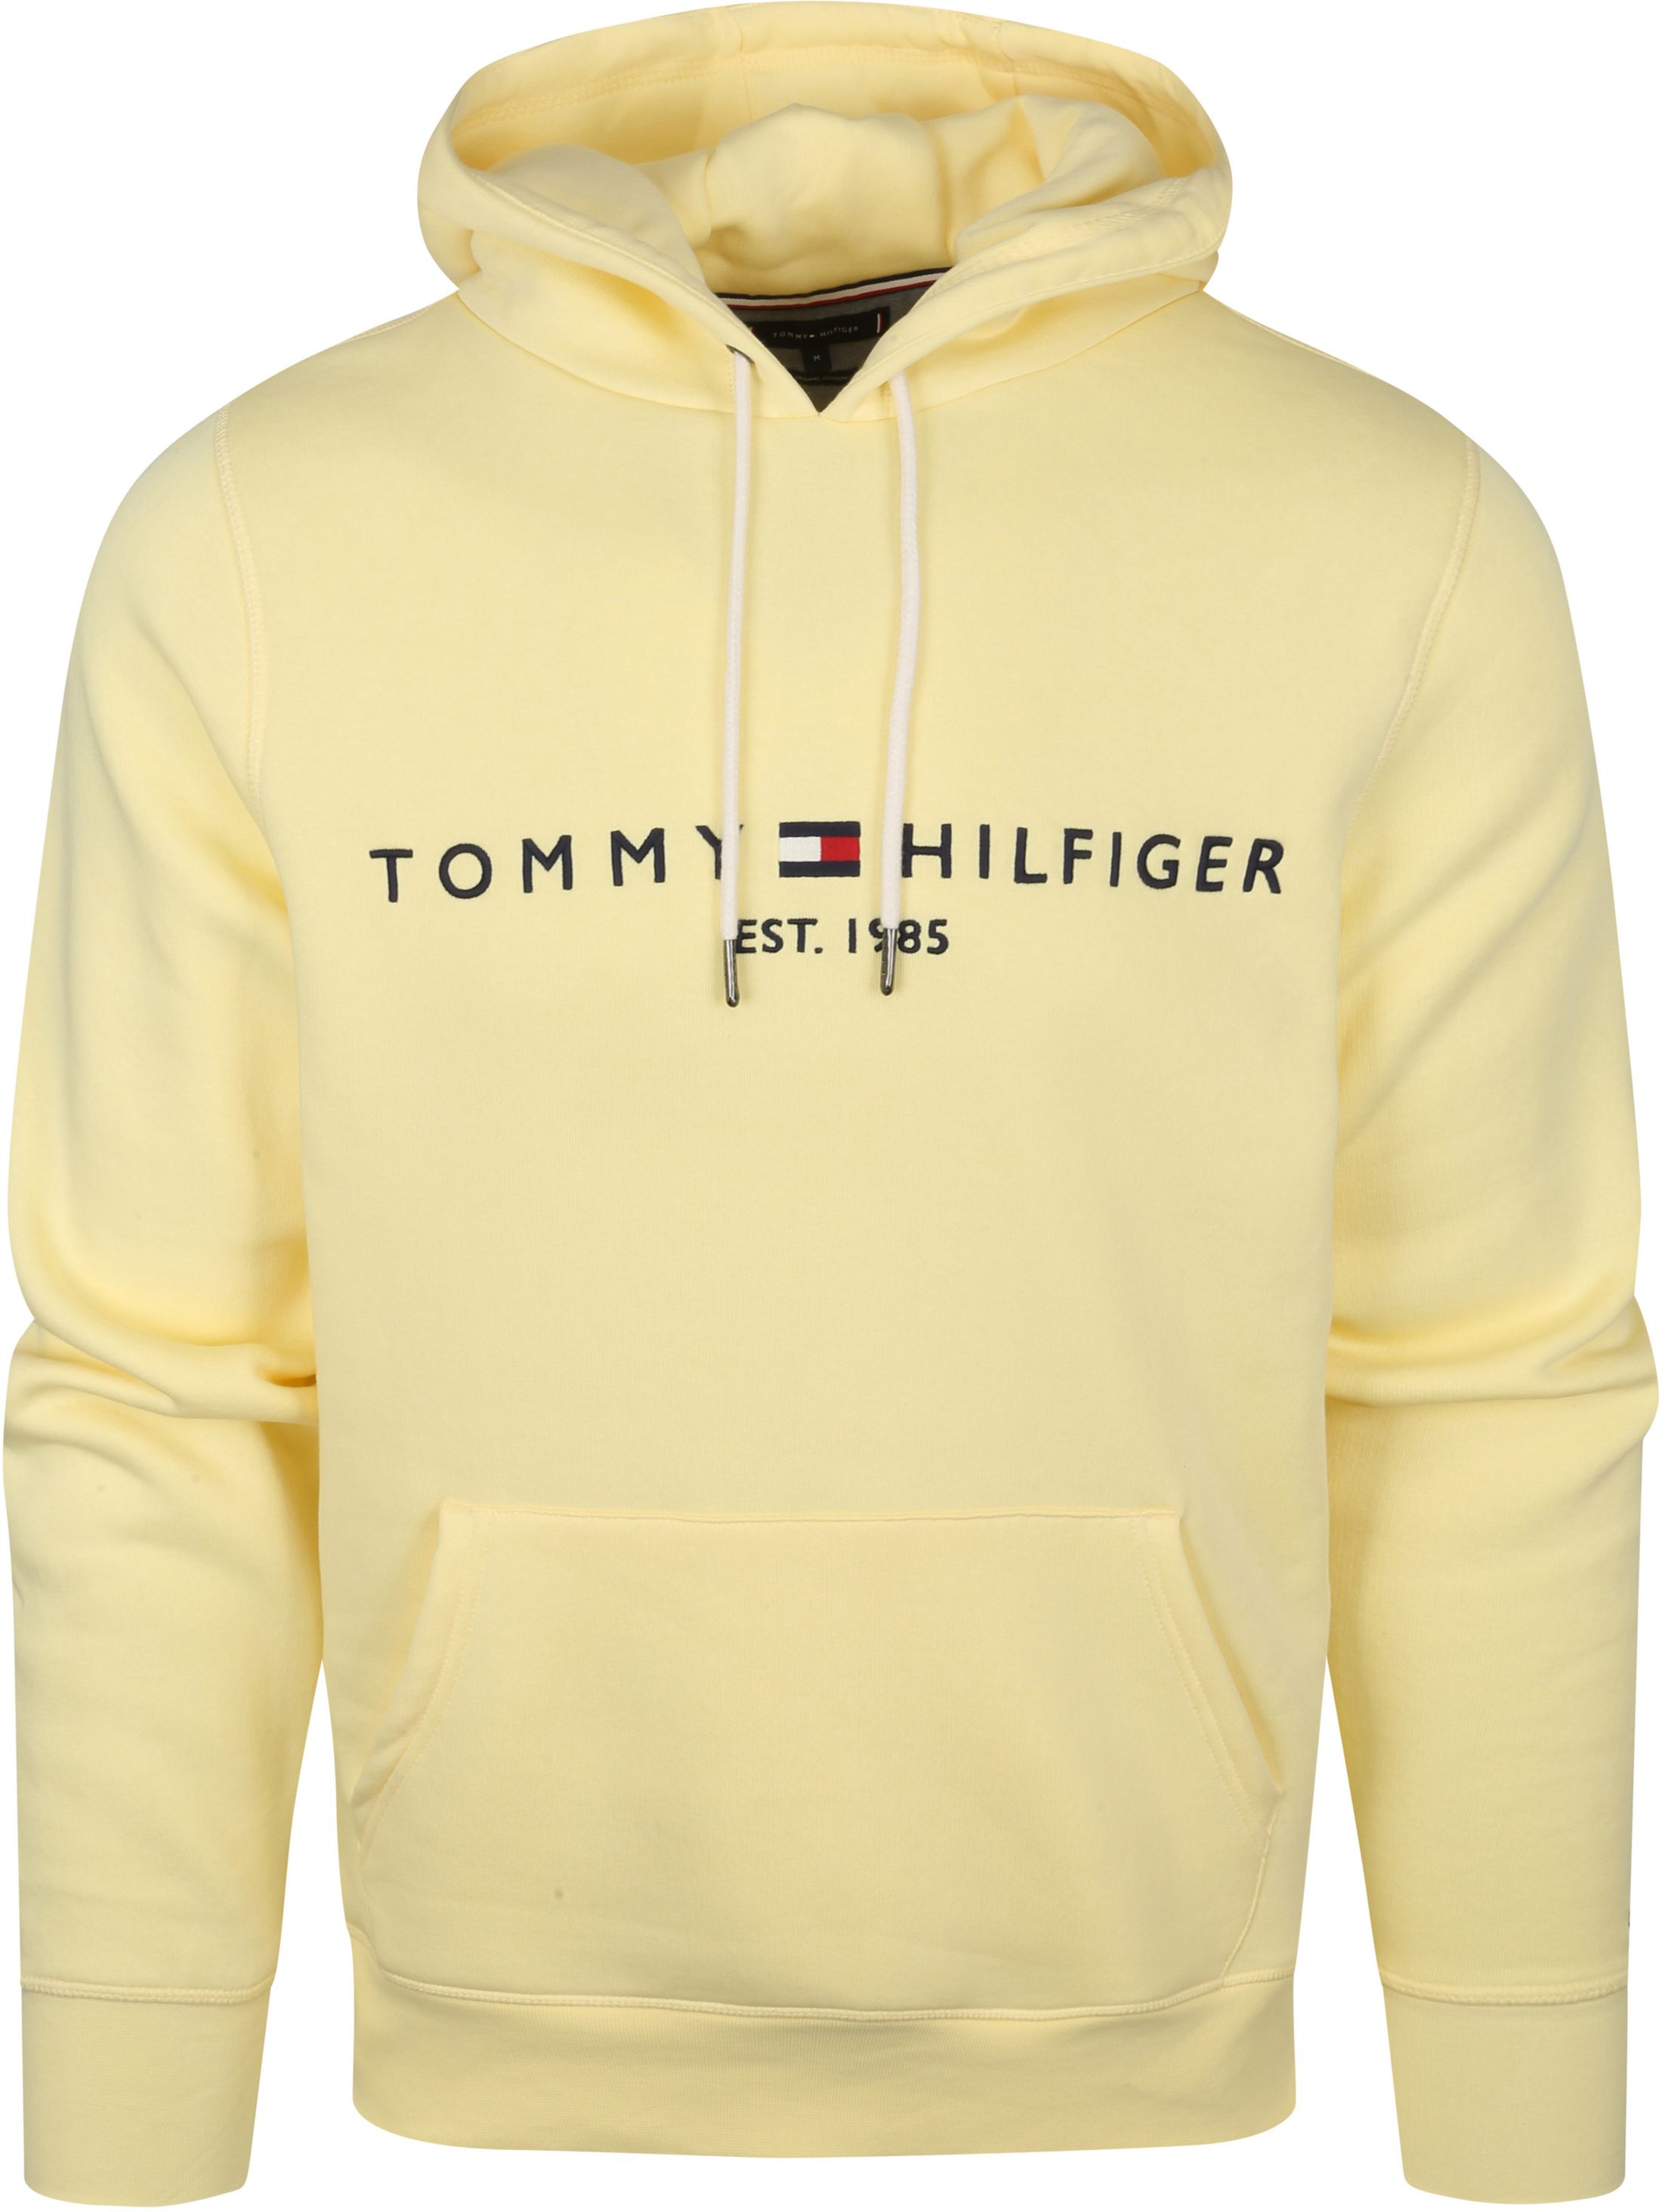 Tommy Hilfiger Hoodie Yellow size L